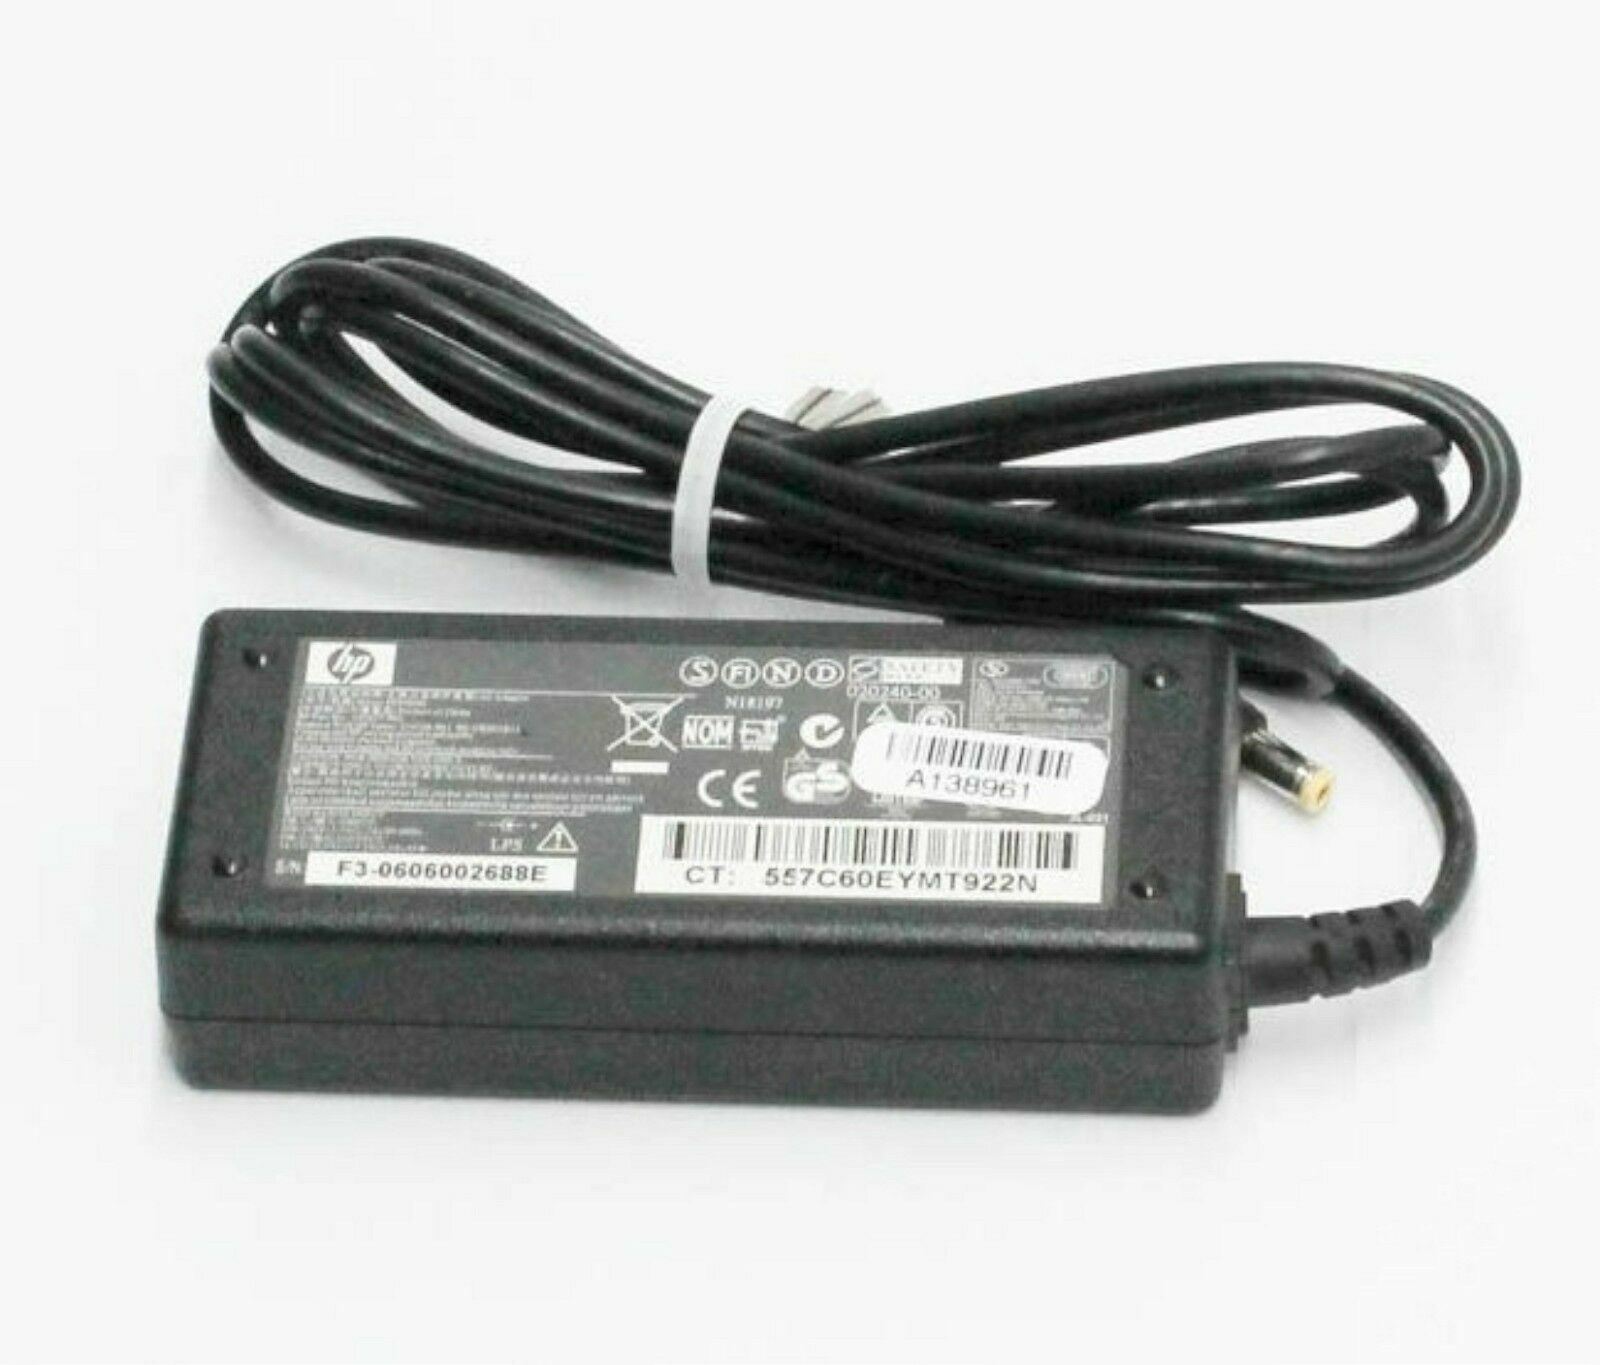 Primary image for OEM AC Adapter for HP Compaq 65W 18.5V 3.5A 239704-001 Power Supply Cord